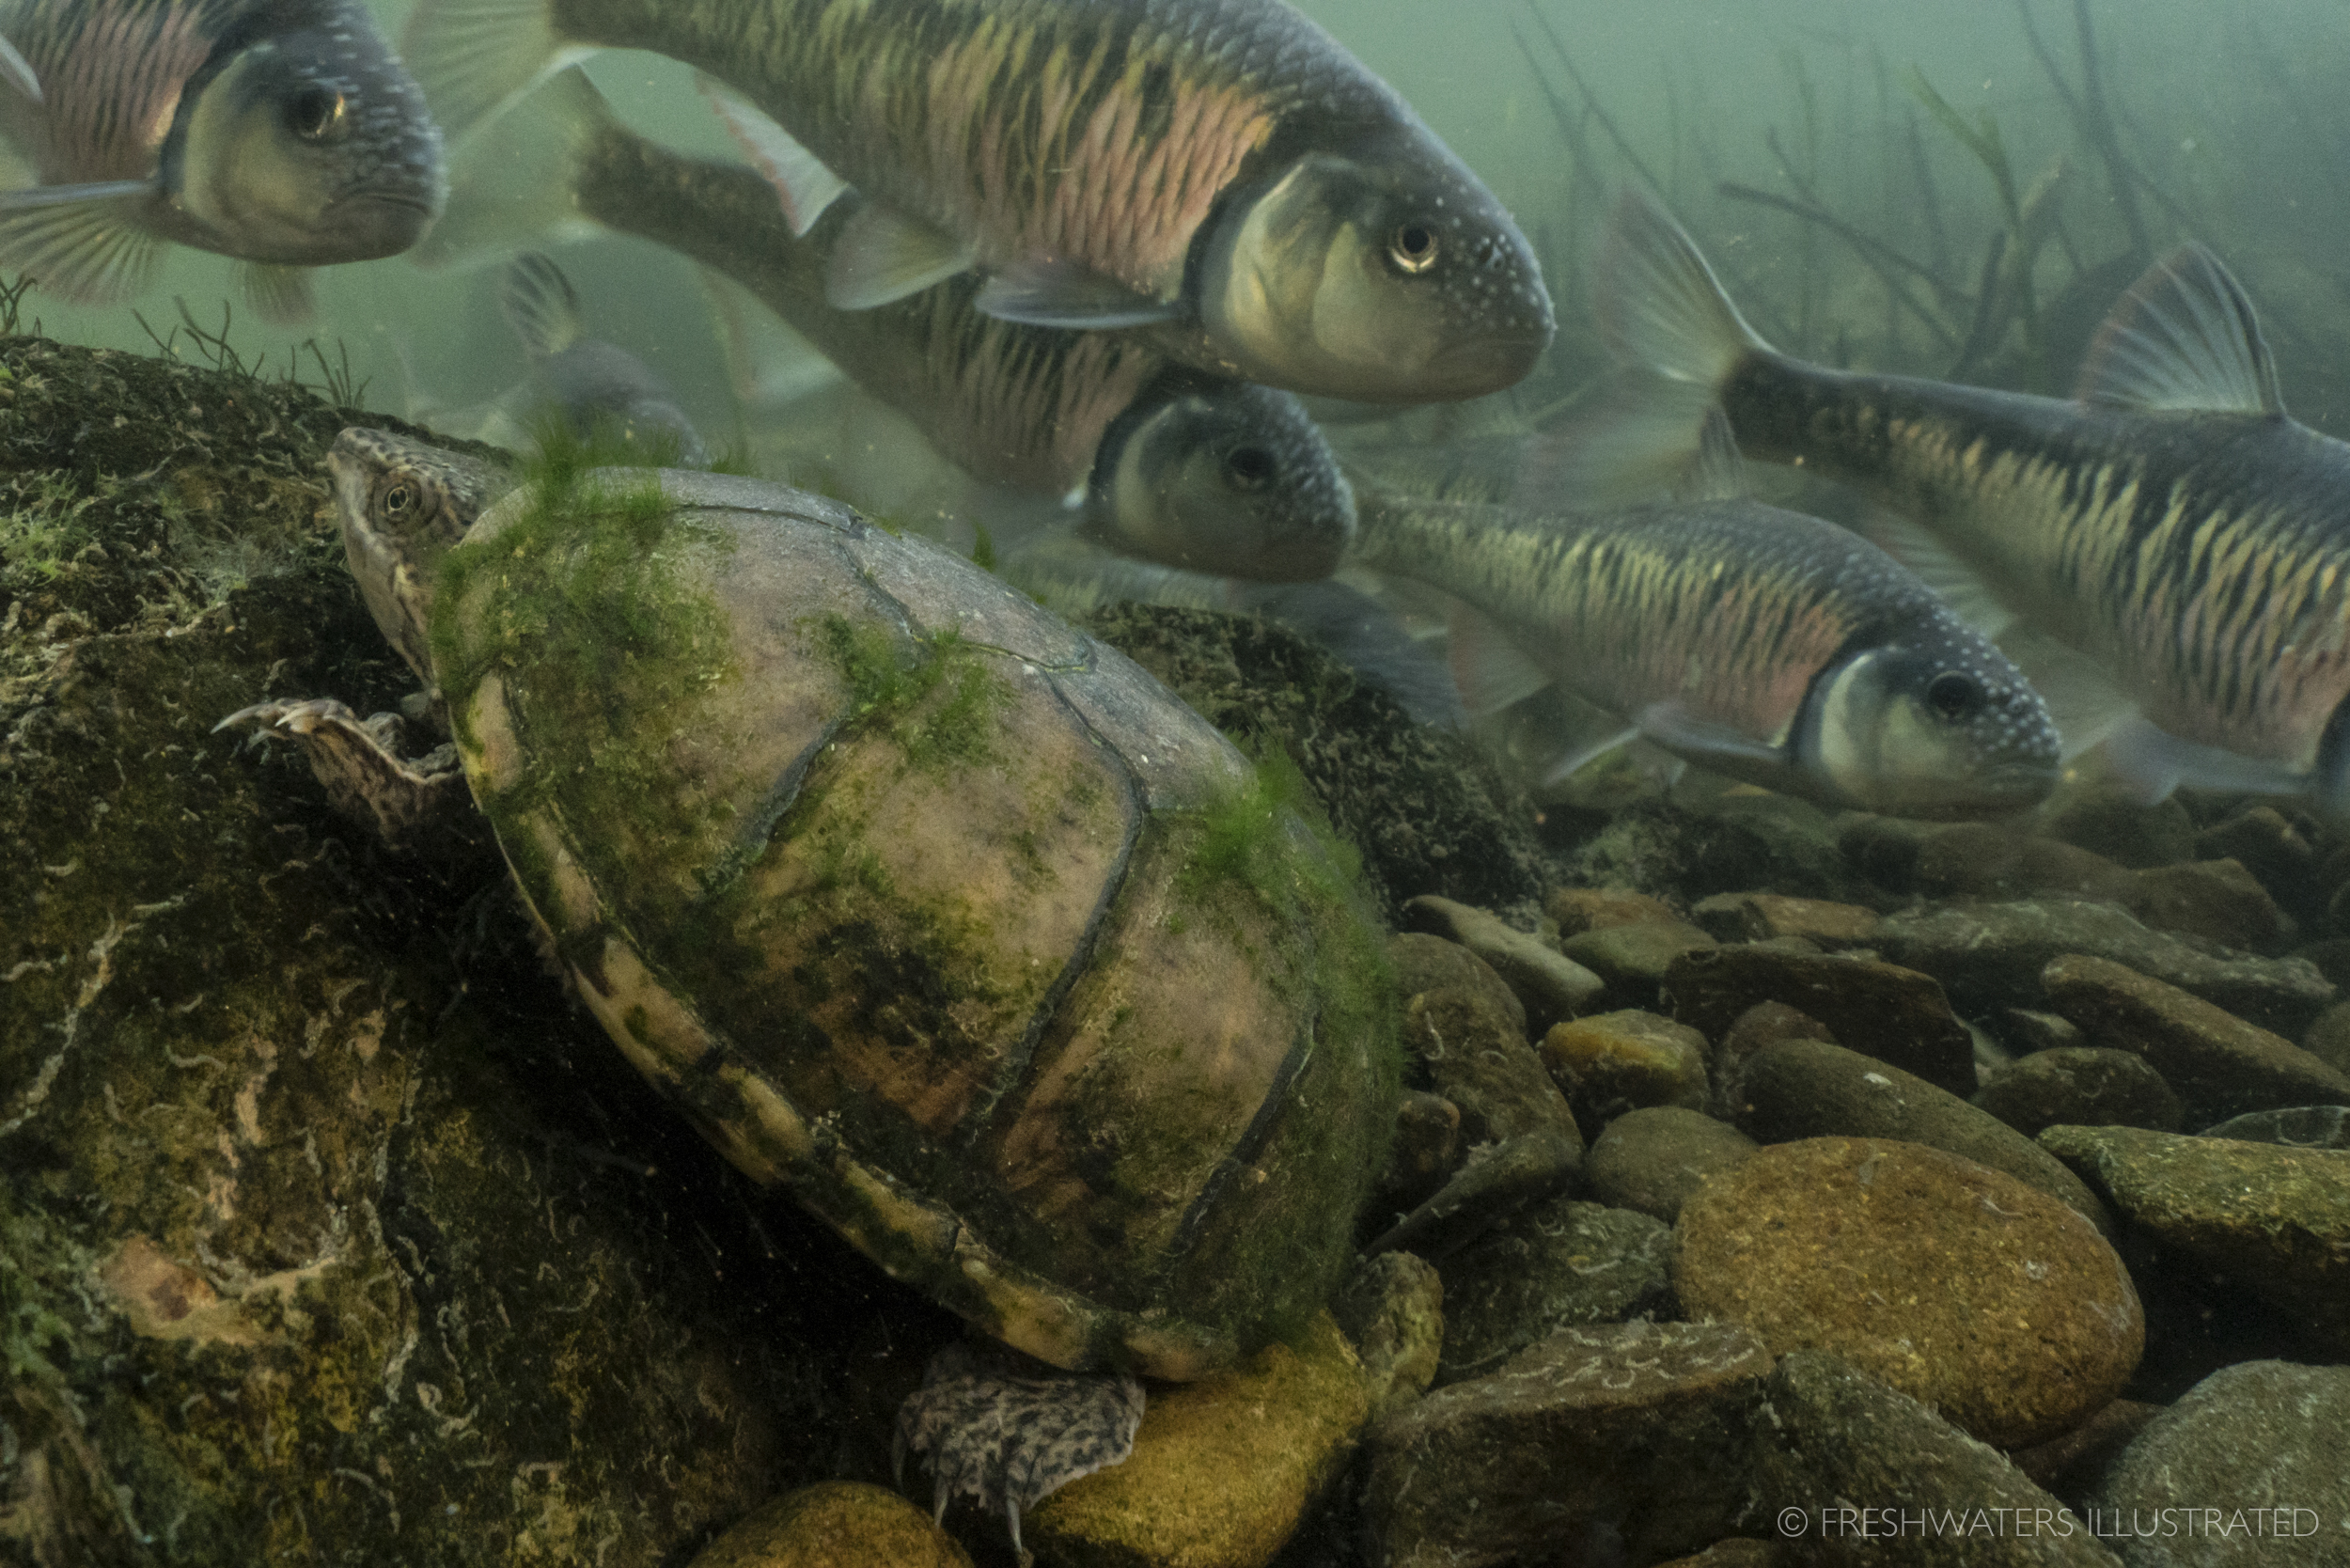  A curious musk turtle (Sternotherus odoratus) sneaks past a school of spawning striped shiners (Luxilus chrysocephalus). Little River, Tennessee  www.FreshwatersIllustrated.org  